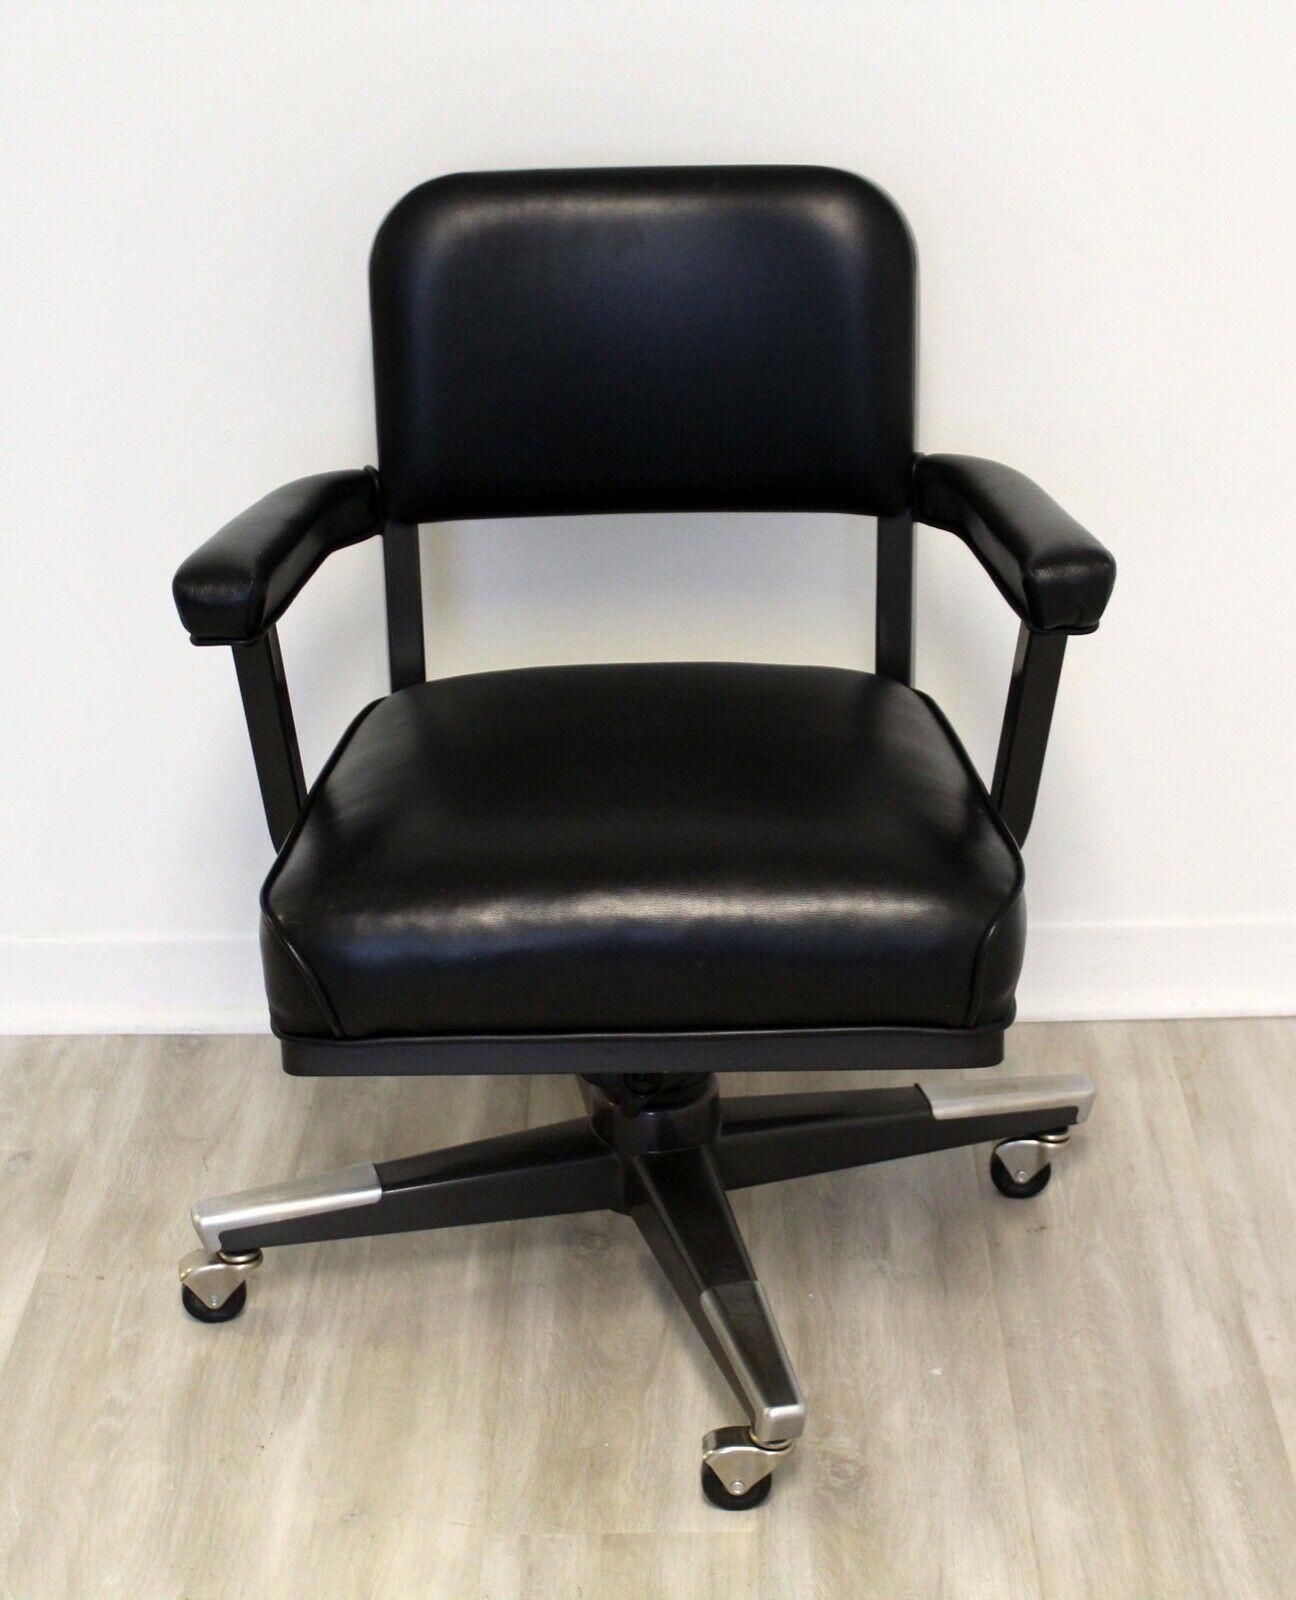 An ergonomic desk or office chair finished in a pewter color and hand welded steel construction, this chair by McDowell & Craig is reminiscent of the mid century modern Steelcase office furniture, yet modern and comfortable. In very good